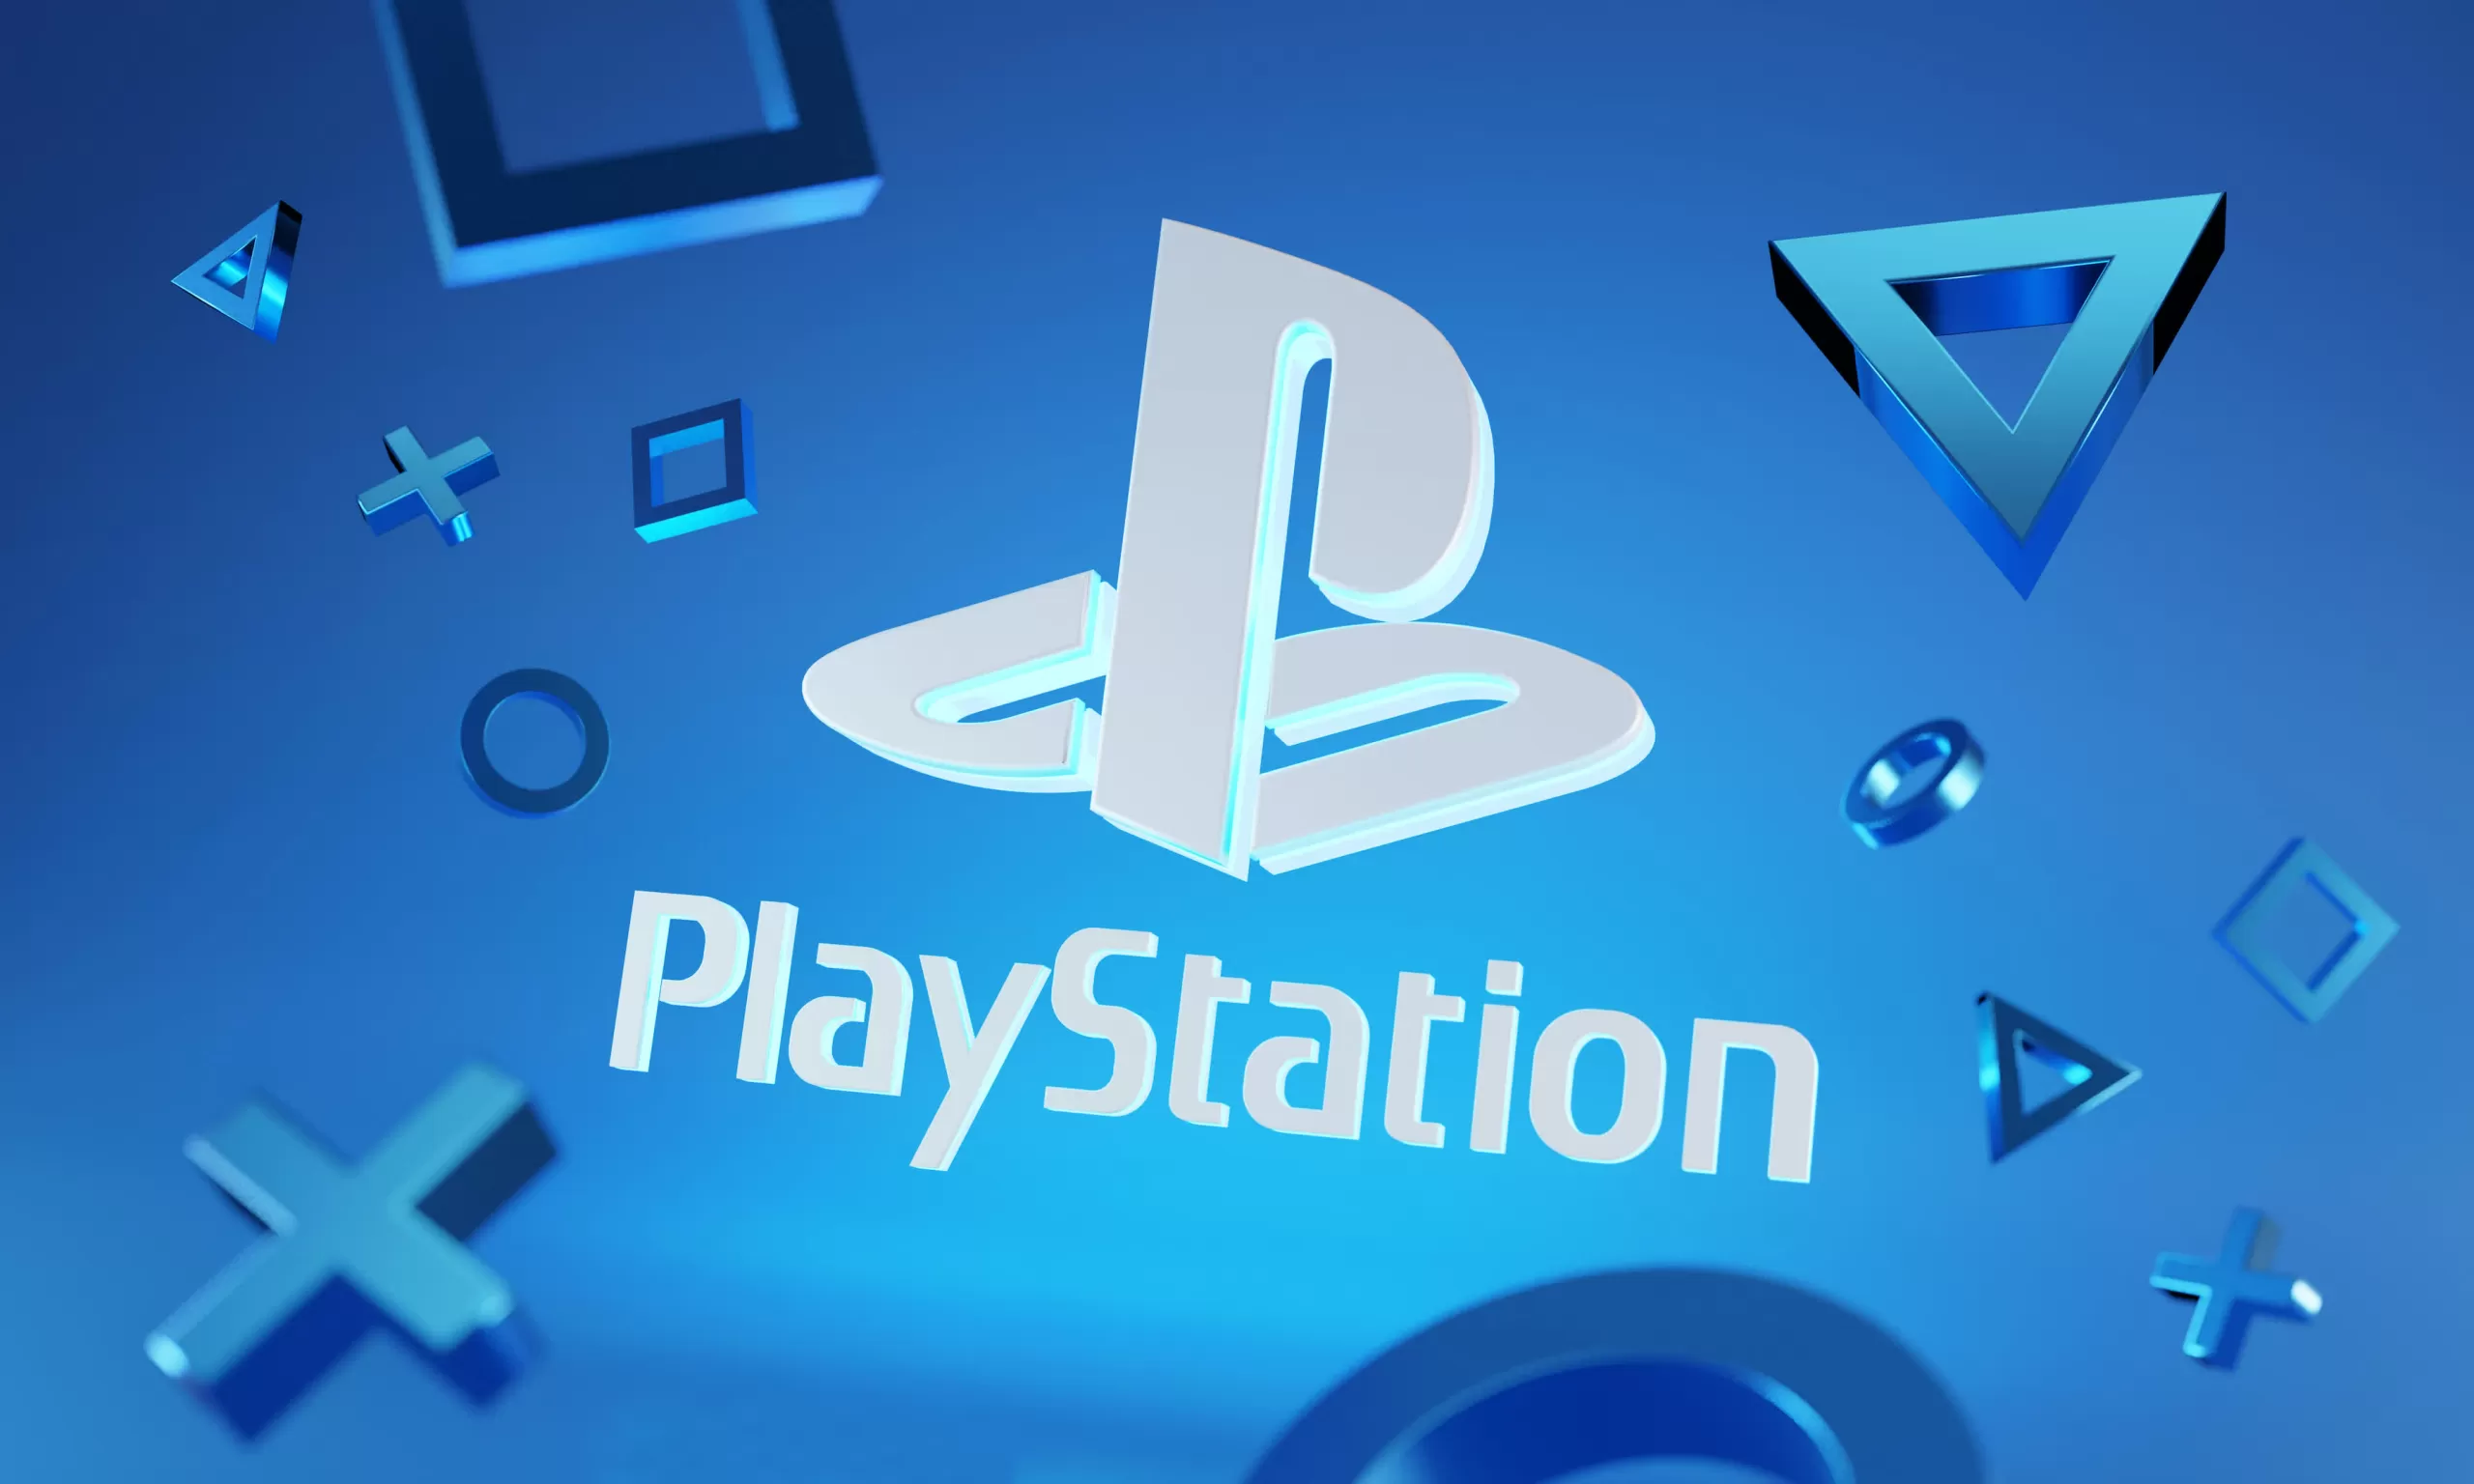 Sony clarifies it will not be listening to your conversation on the PS4 or PS5